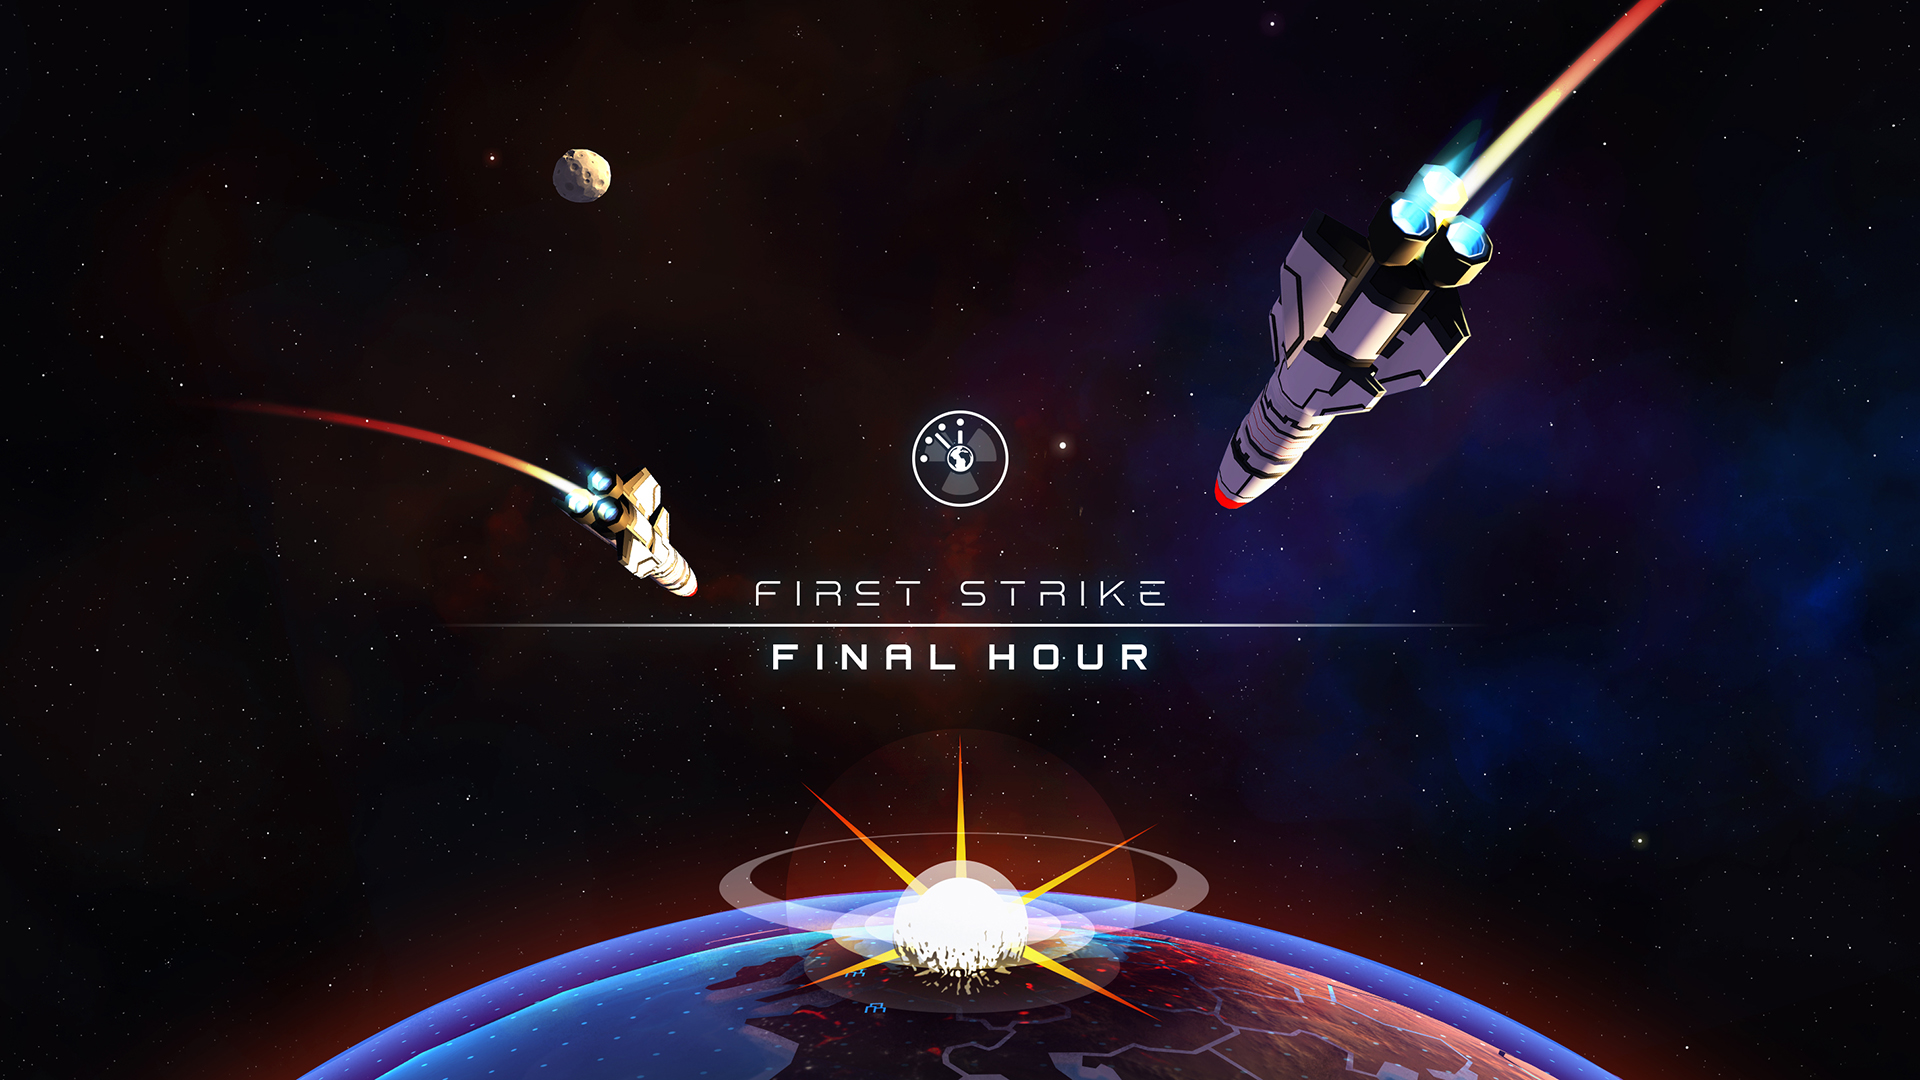 [PC] First Strike: Final Hour (Strategy|Indie|Action|2017)